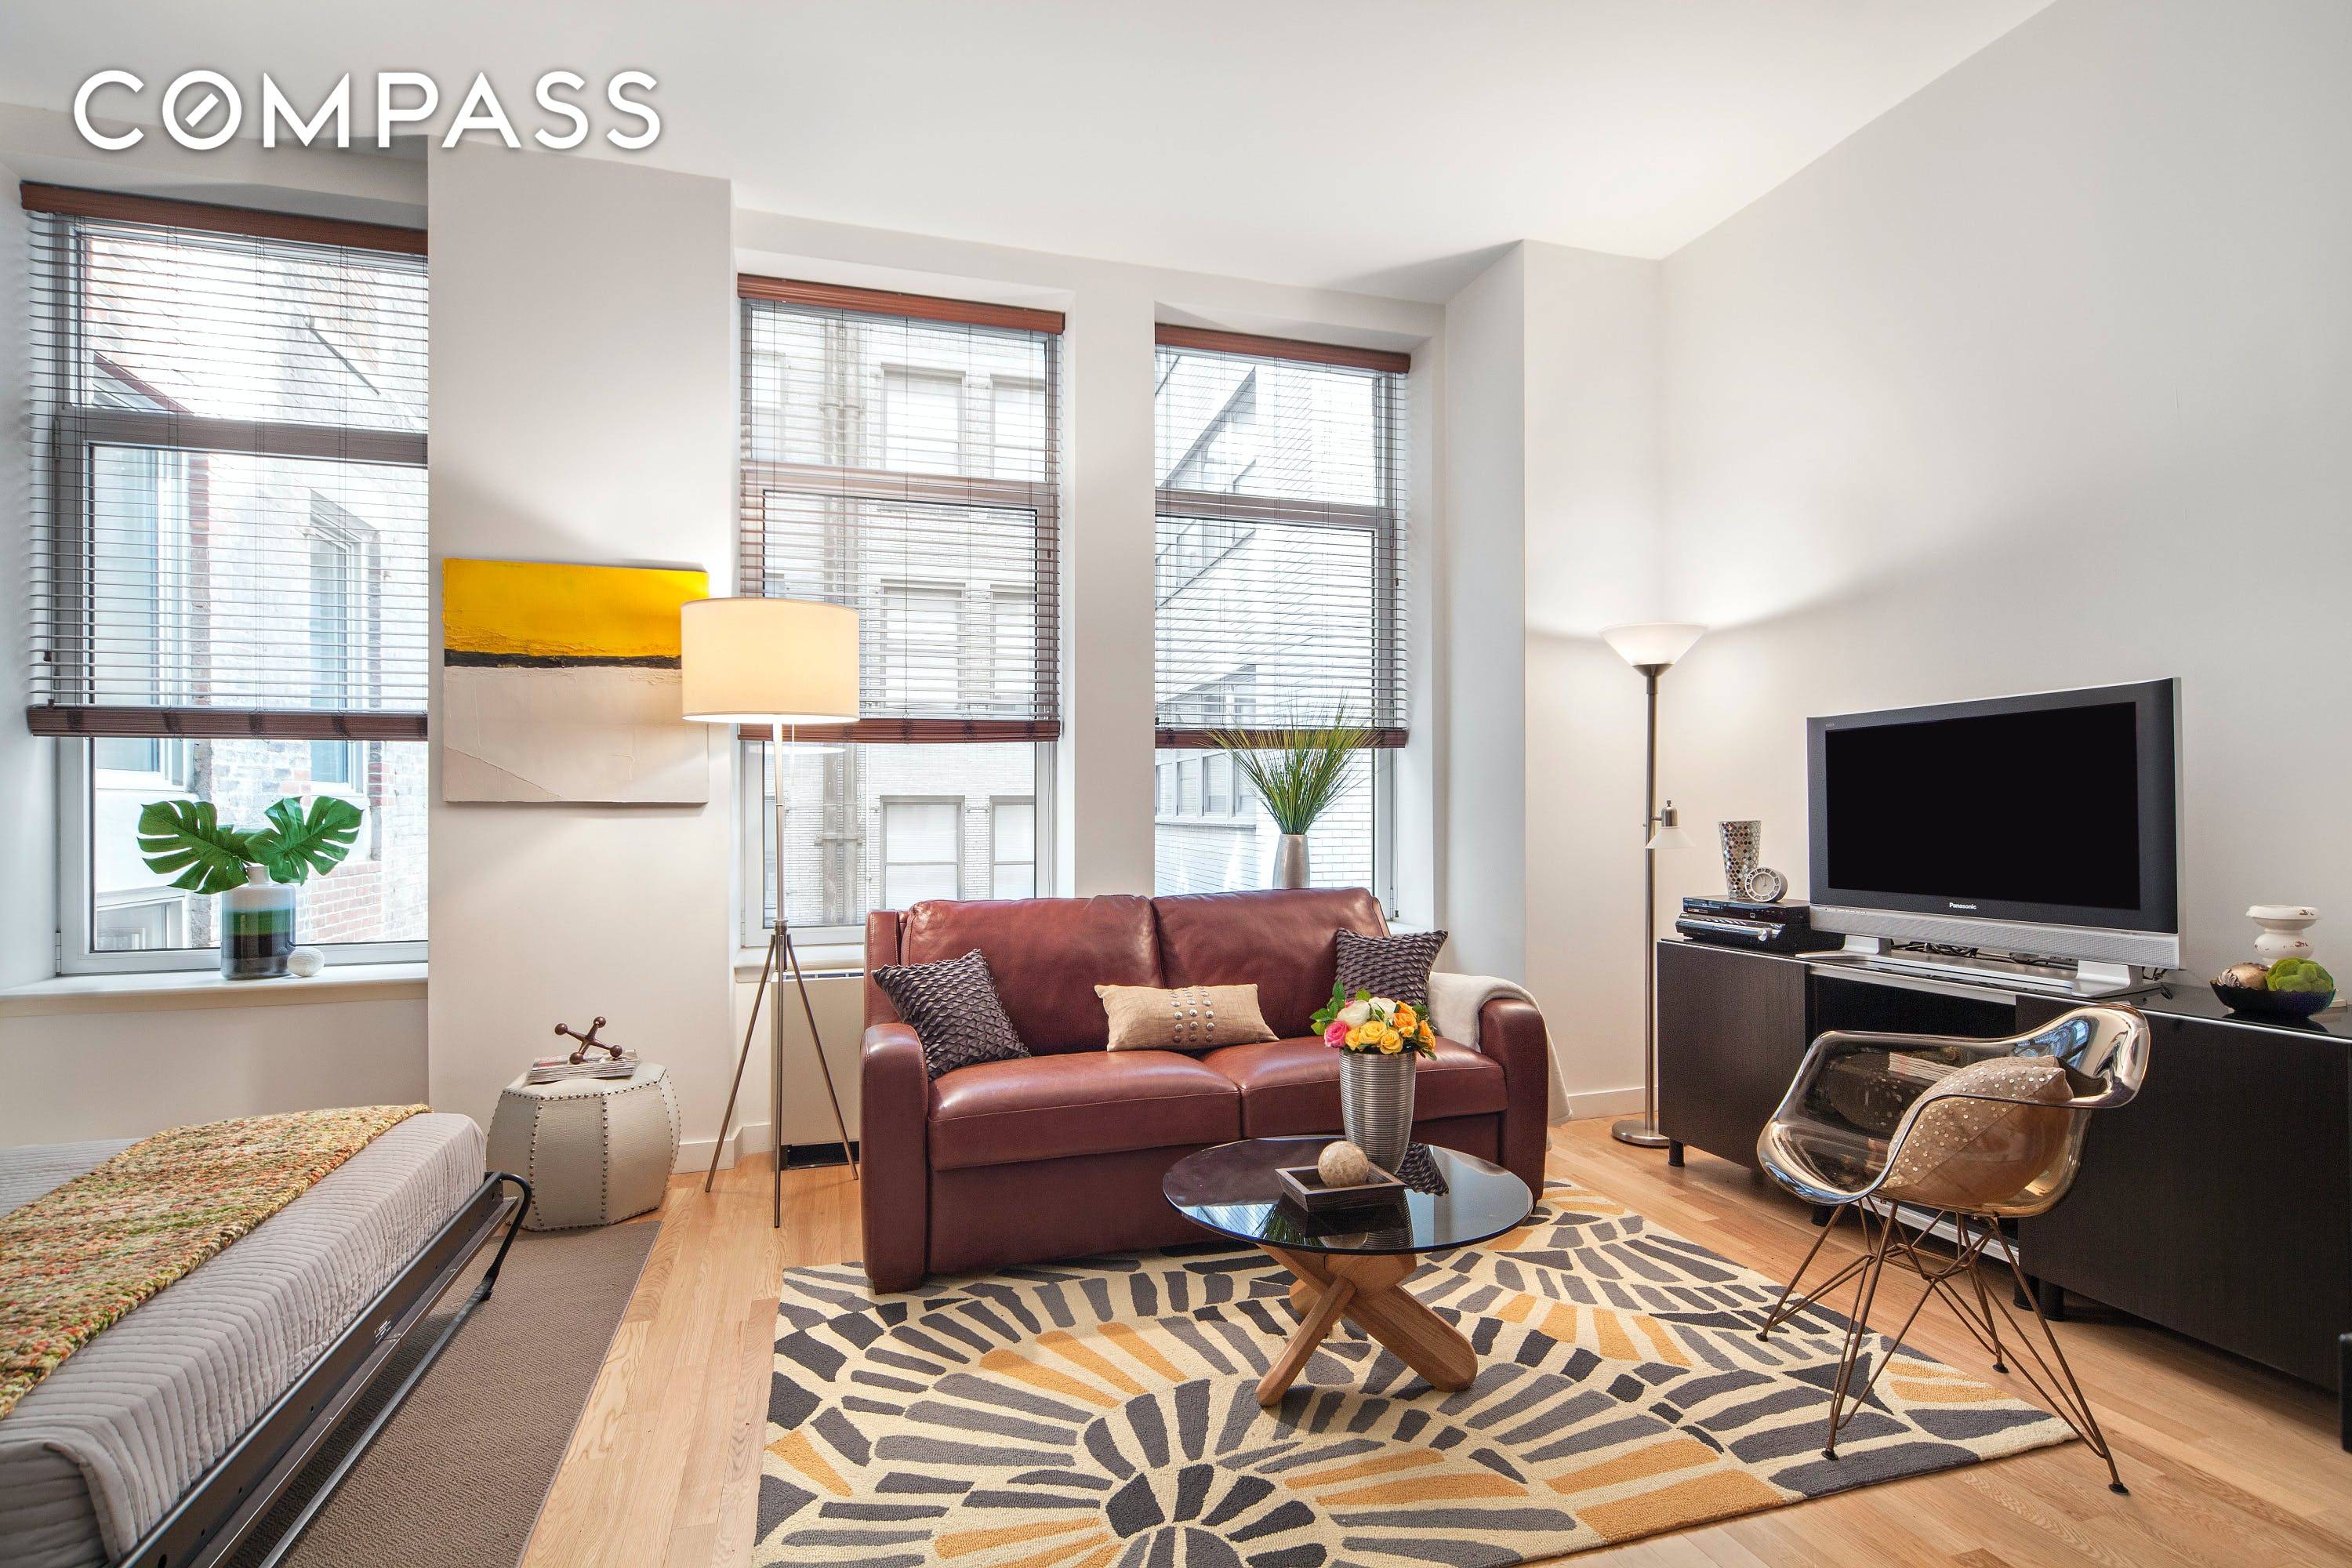 Available now FULLY FURNISHED ONLY THE APARTMENT Open, airy, and in impeccable condition, Residence 5G is the ideal alcove studio in the perfect Financial District location.